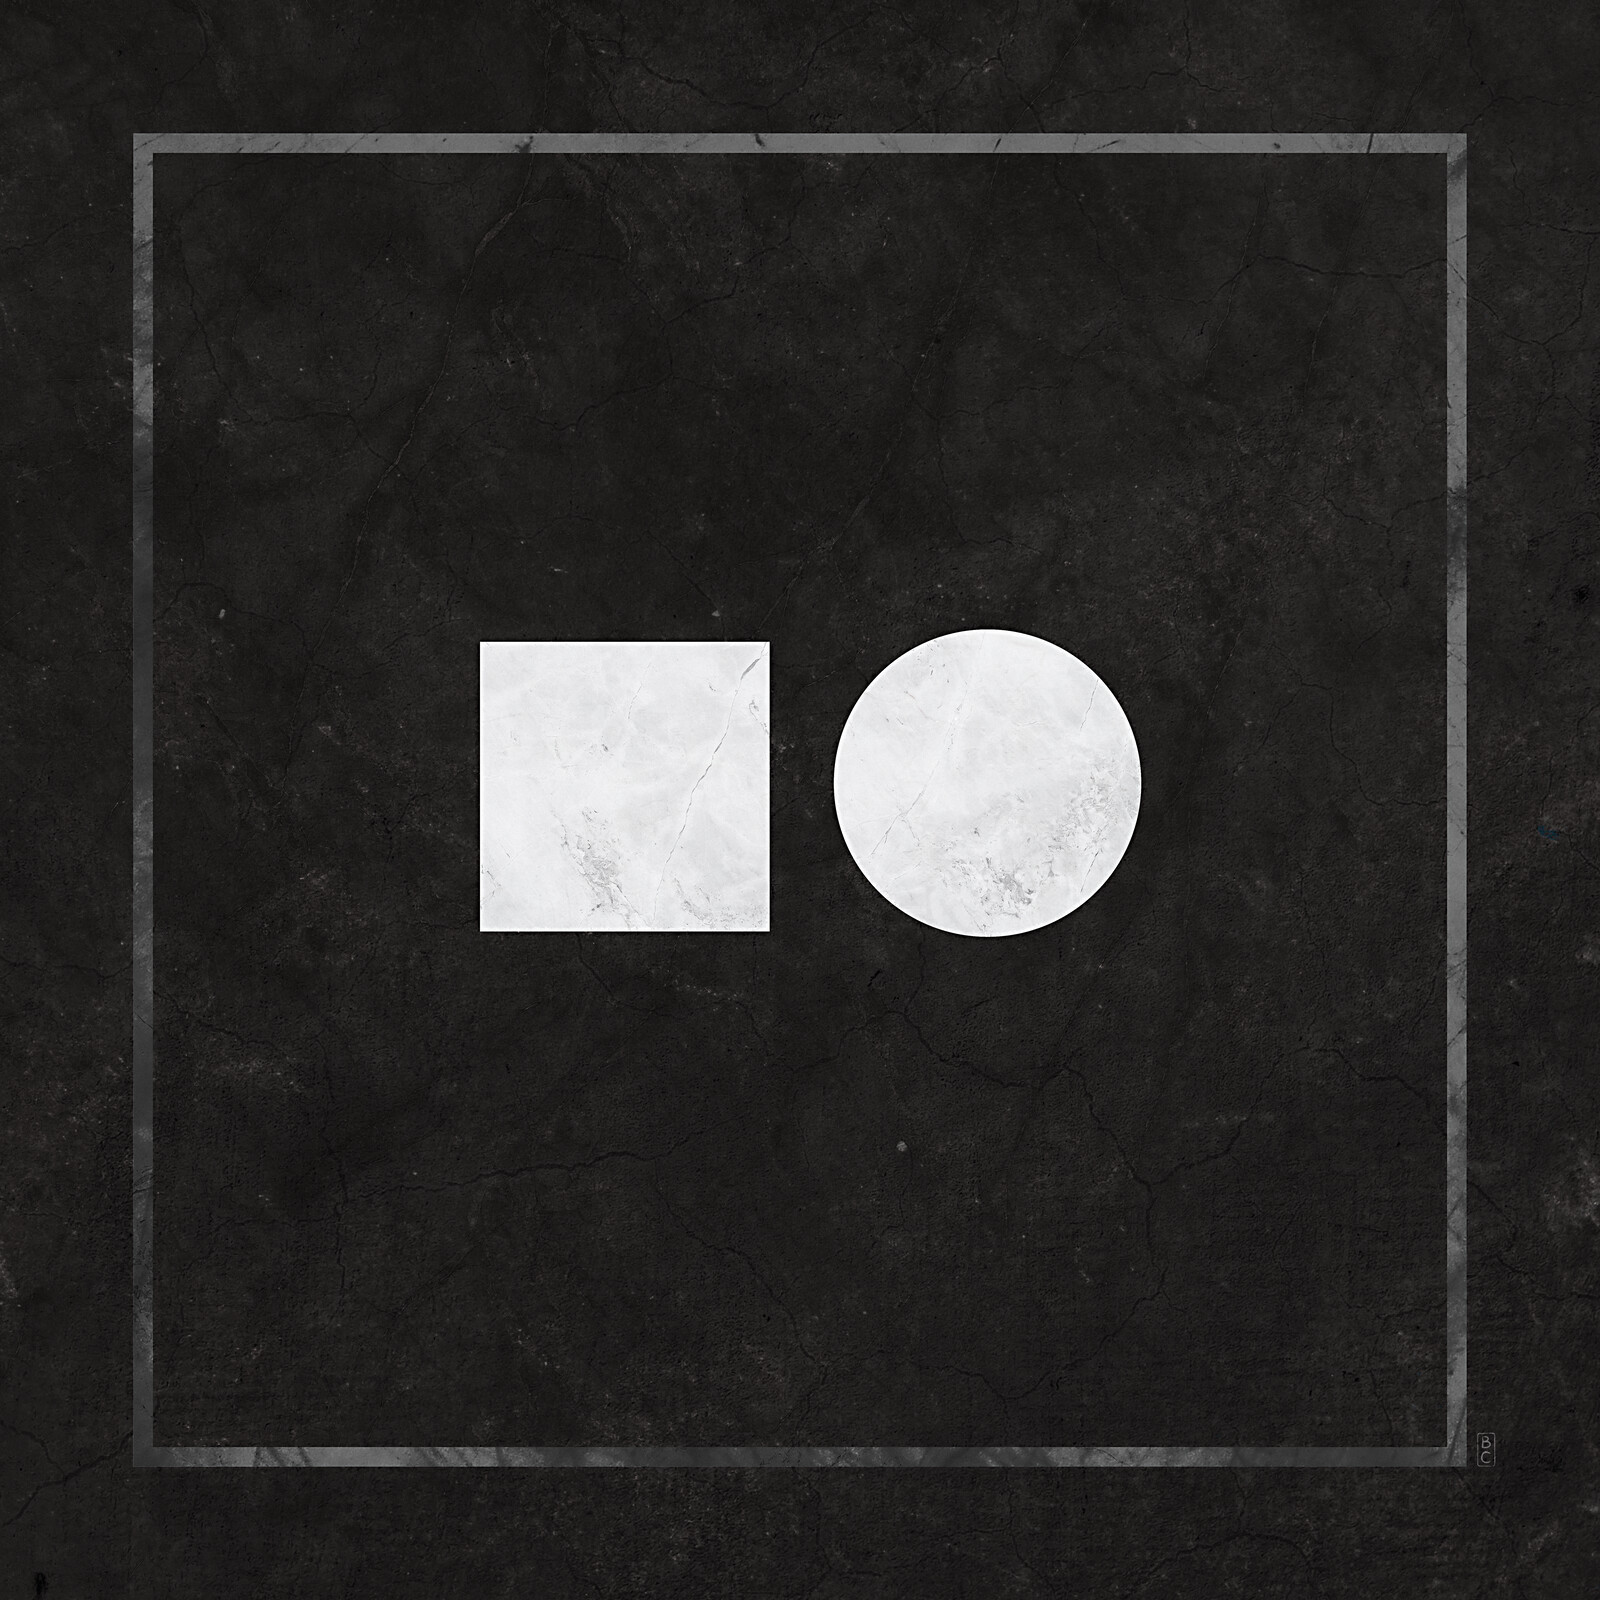 A white square and a white circle on a black background.